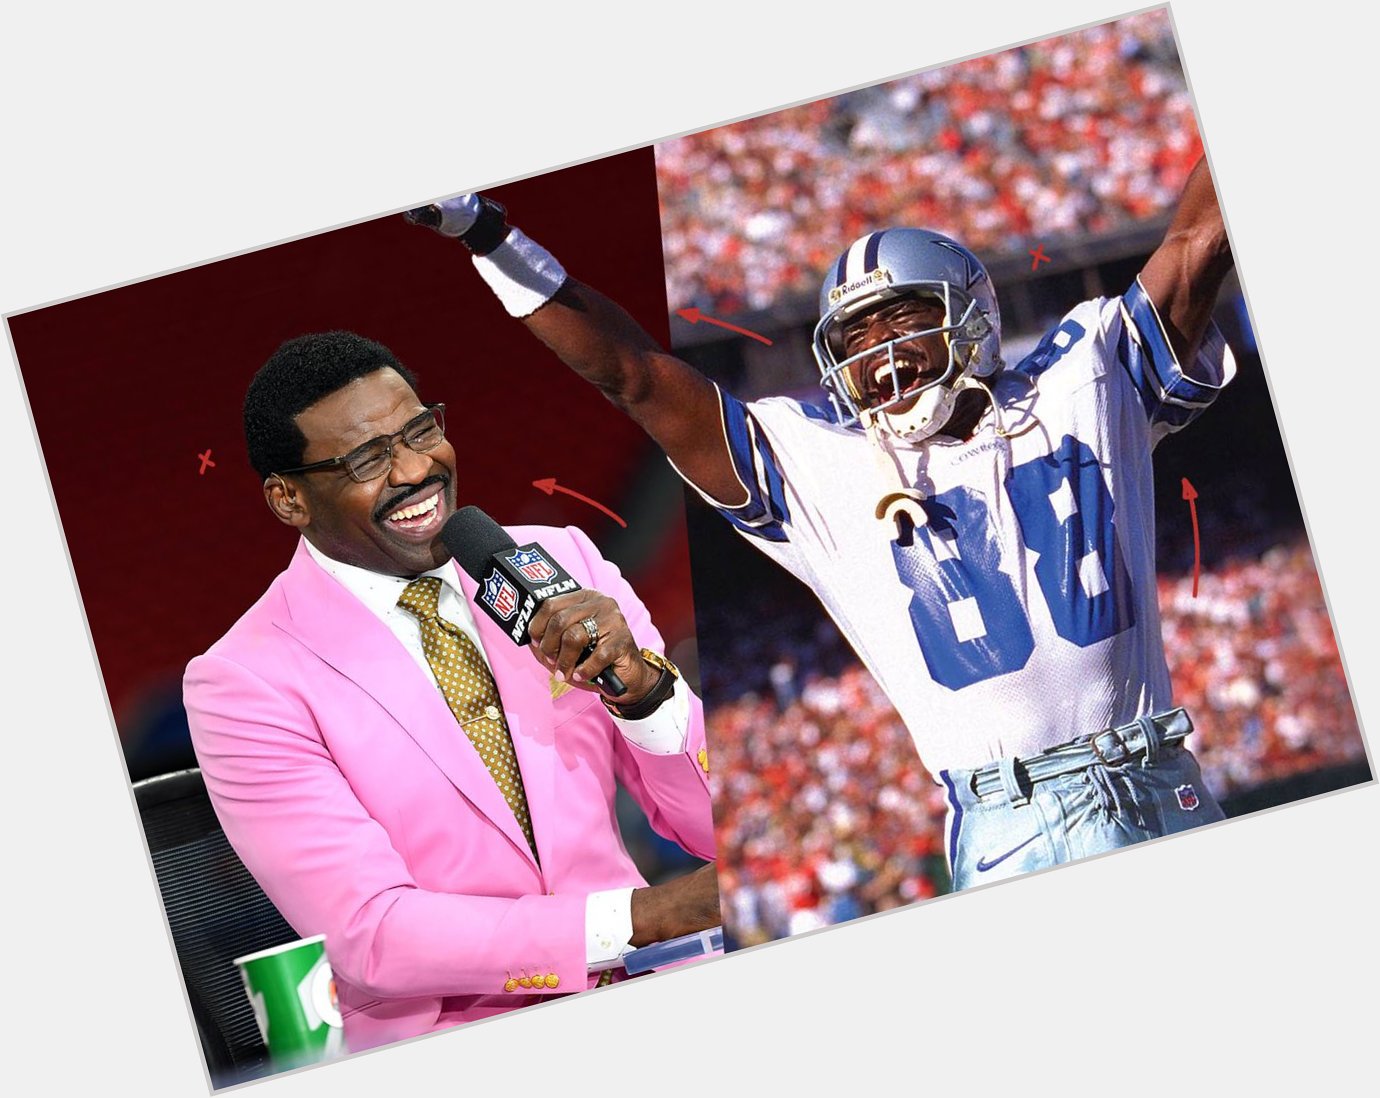 Happy Birthday to legend and Hall of Famer, Playmaker Michael Irvin.  